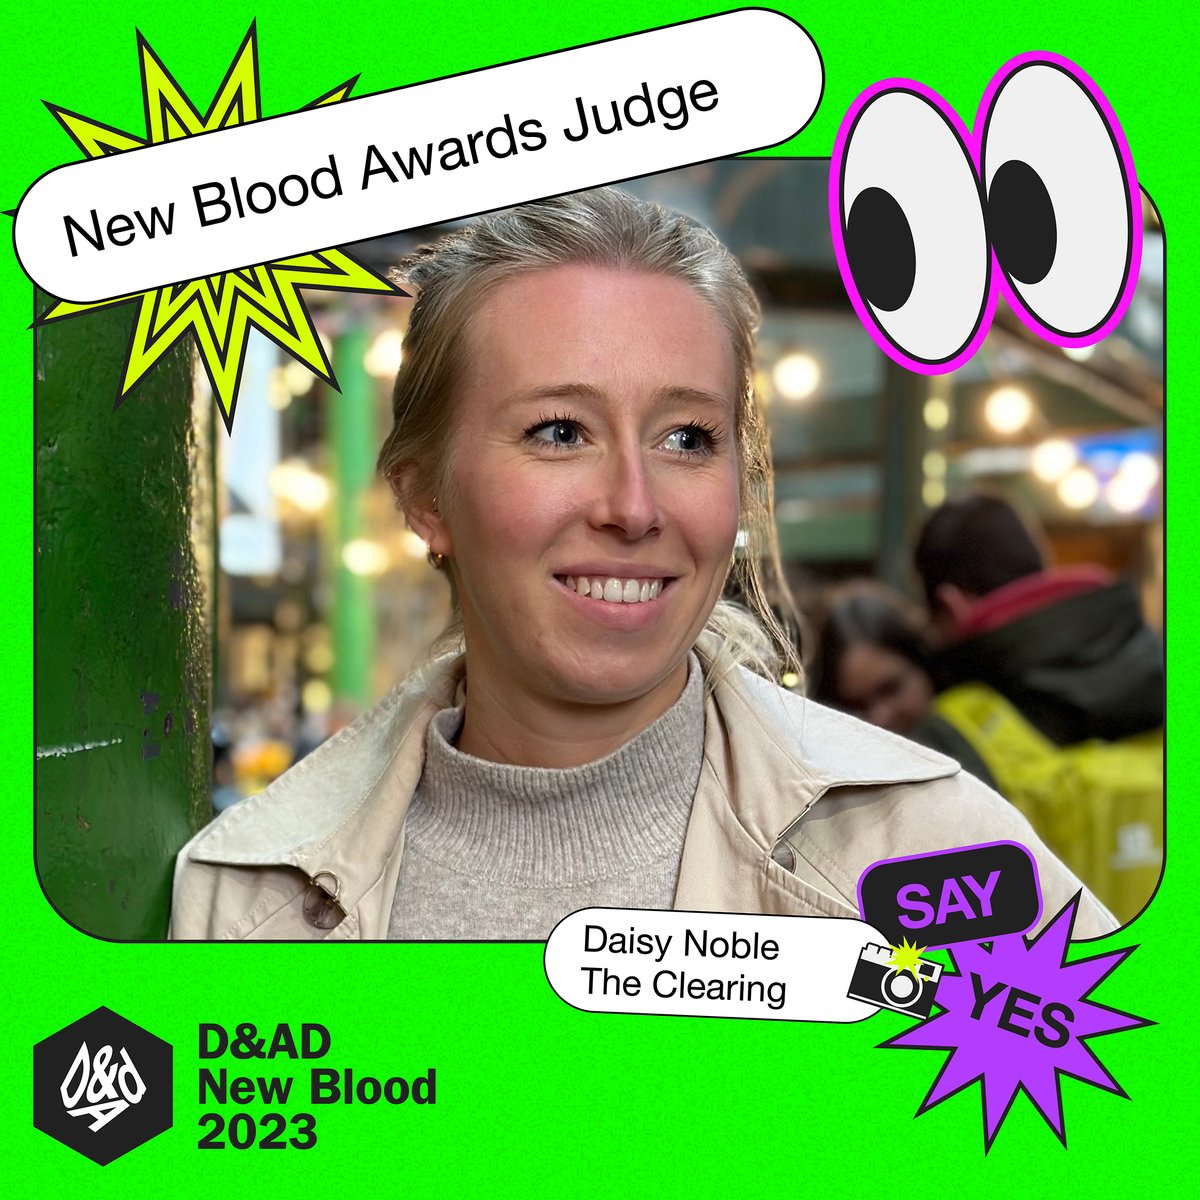 We’re excited to announce that our Strategy Director, Daisy will be a judge on the Barclays brief for @DandADNewBlood awards.
There’s still time to enter: deadline 21st March 2023.
Can’t wait to see the entries!

#NewBloodAwards #DandAD